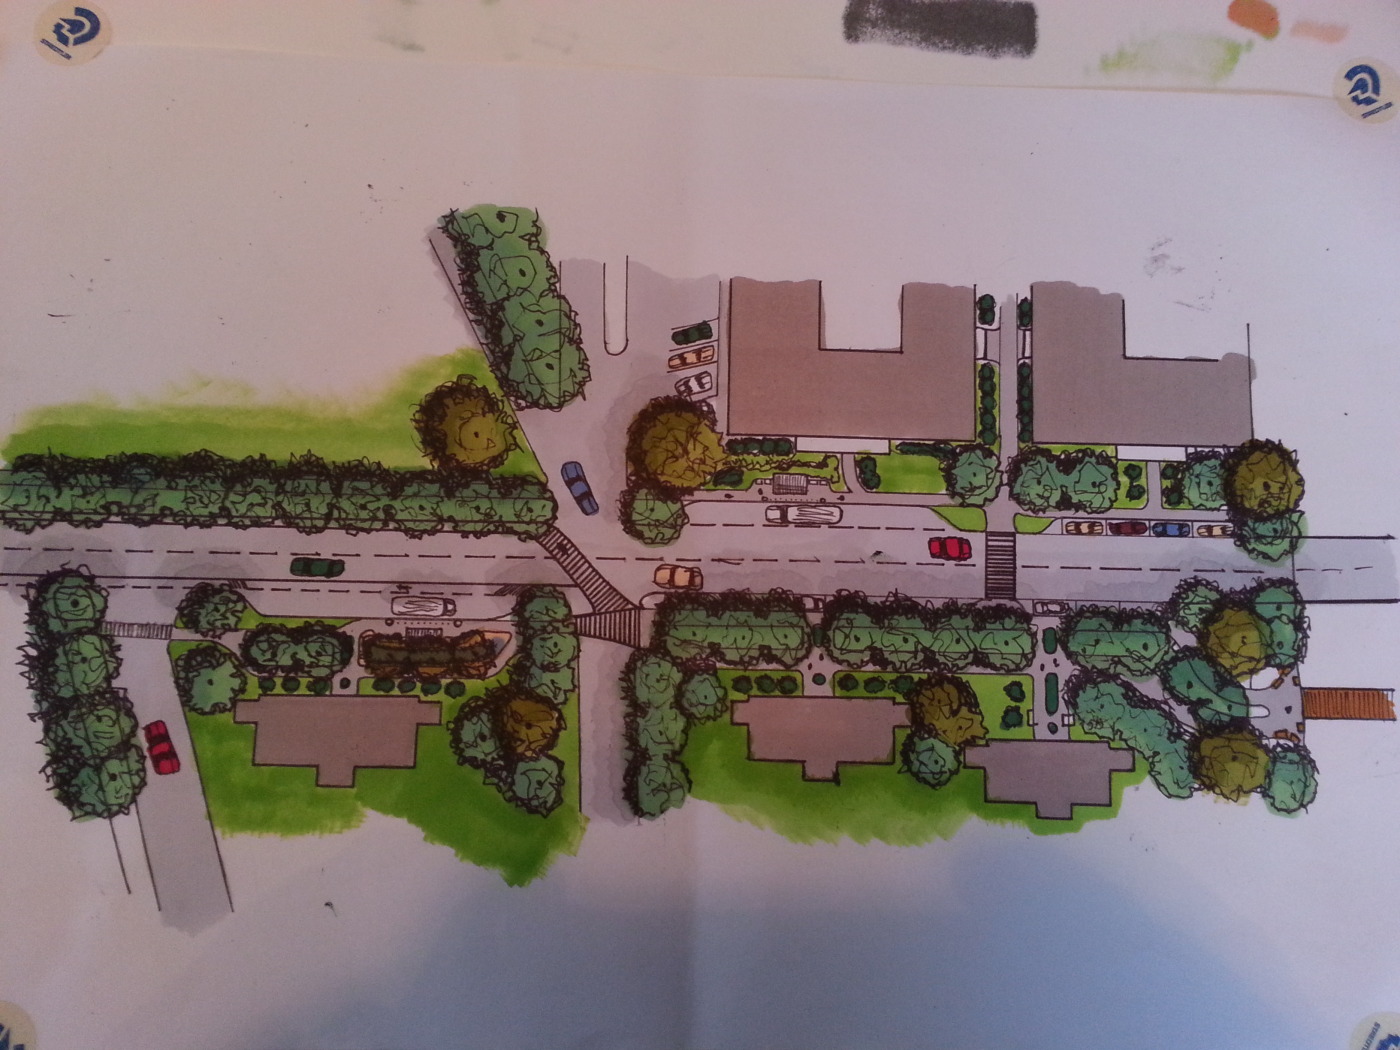 Hand drawn plan view of proposed bus stop